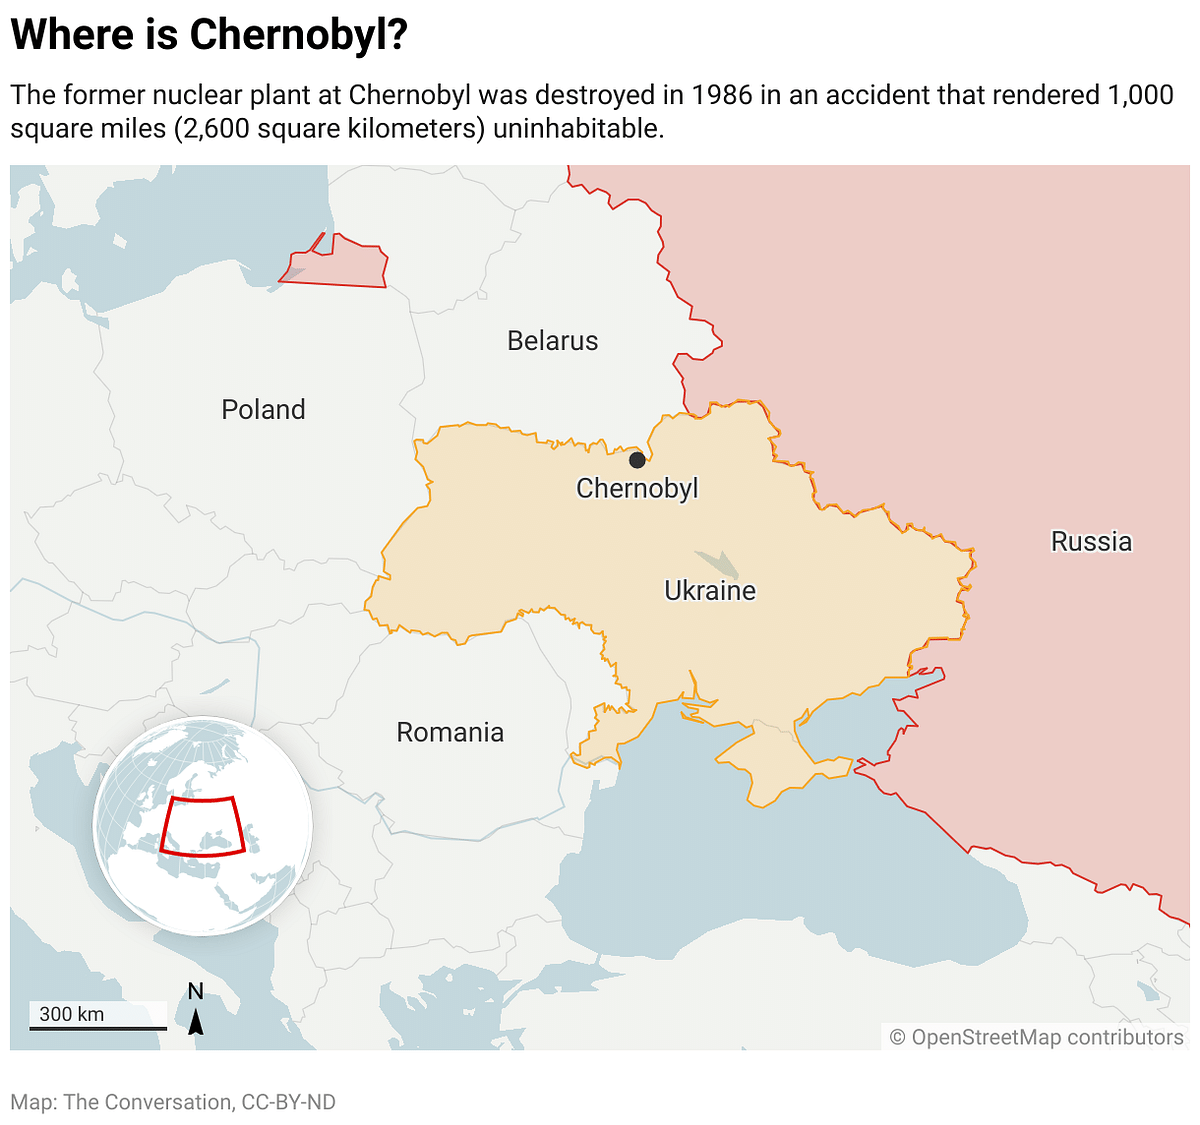 The Chernobyl exclusion zone is among the most radioactively contaminated regions on the planet. 